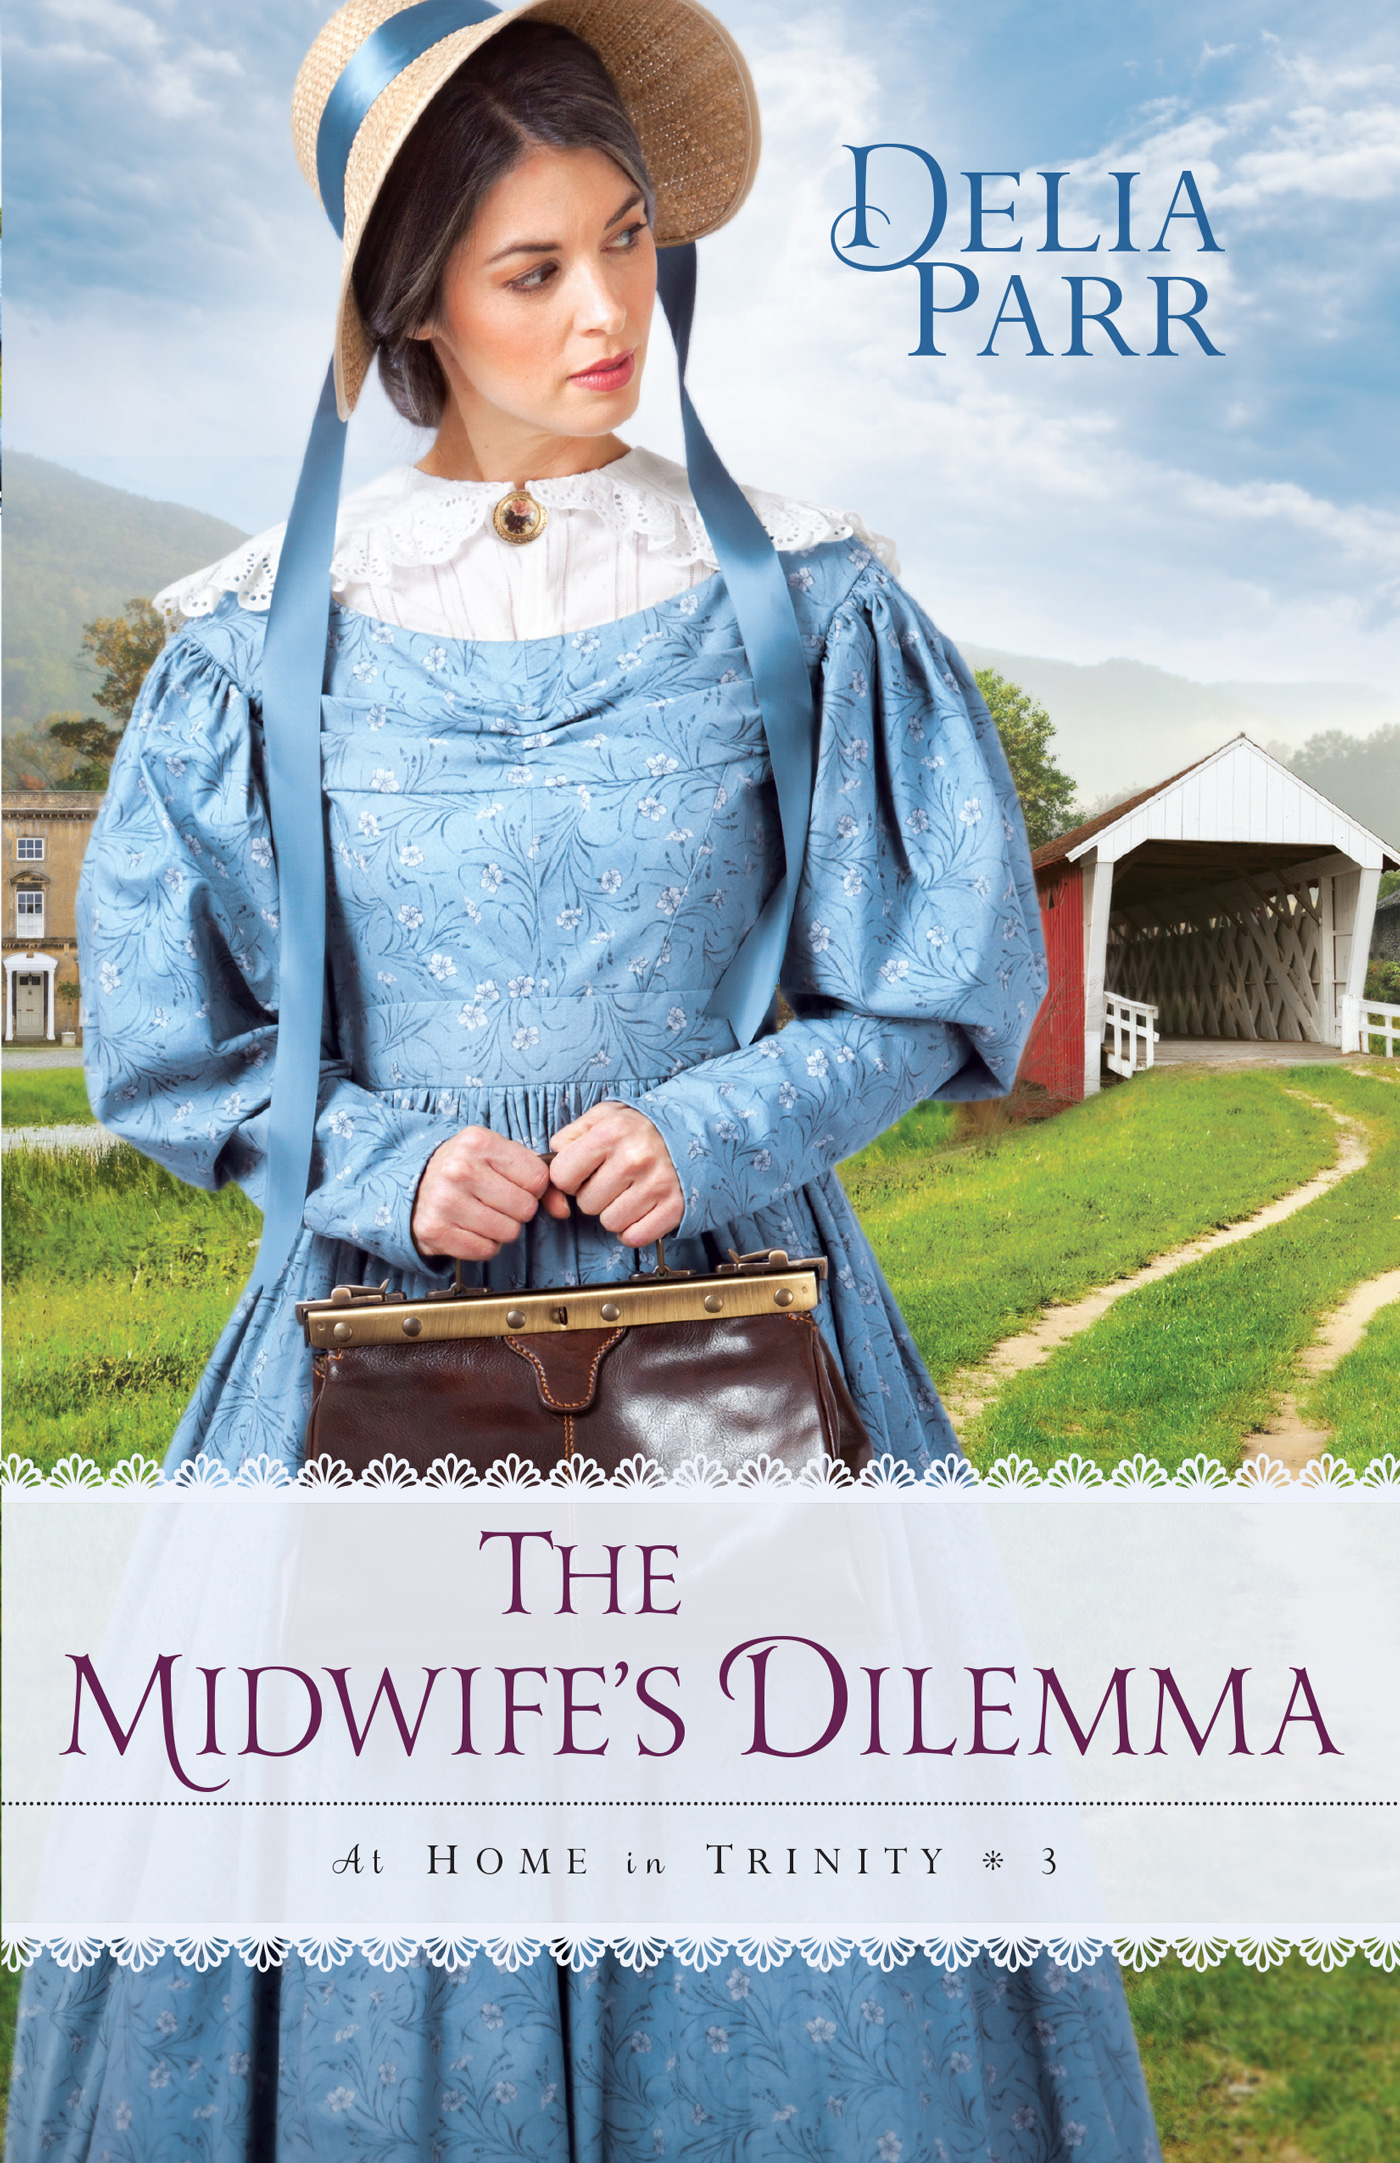 The Midwife's Dilemma (2016) by Delia Parr